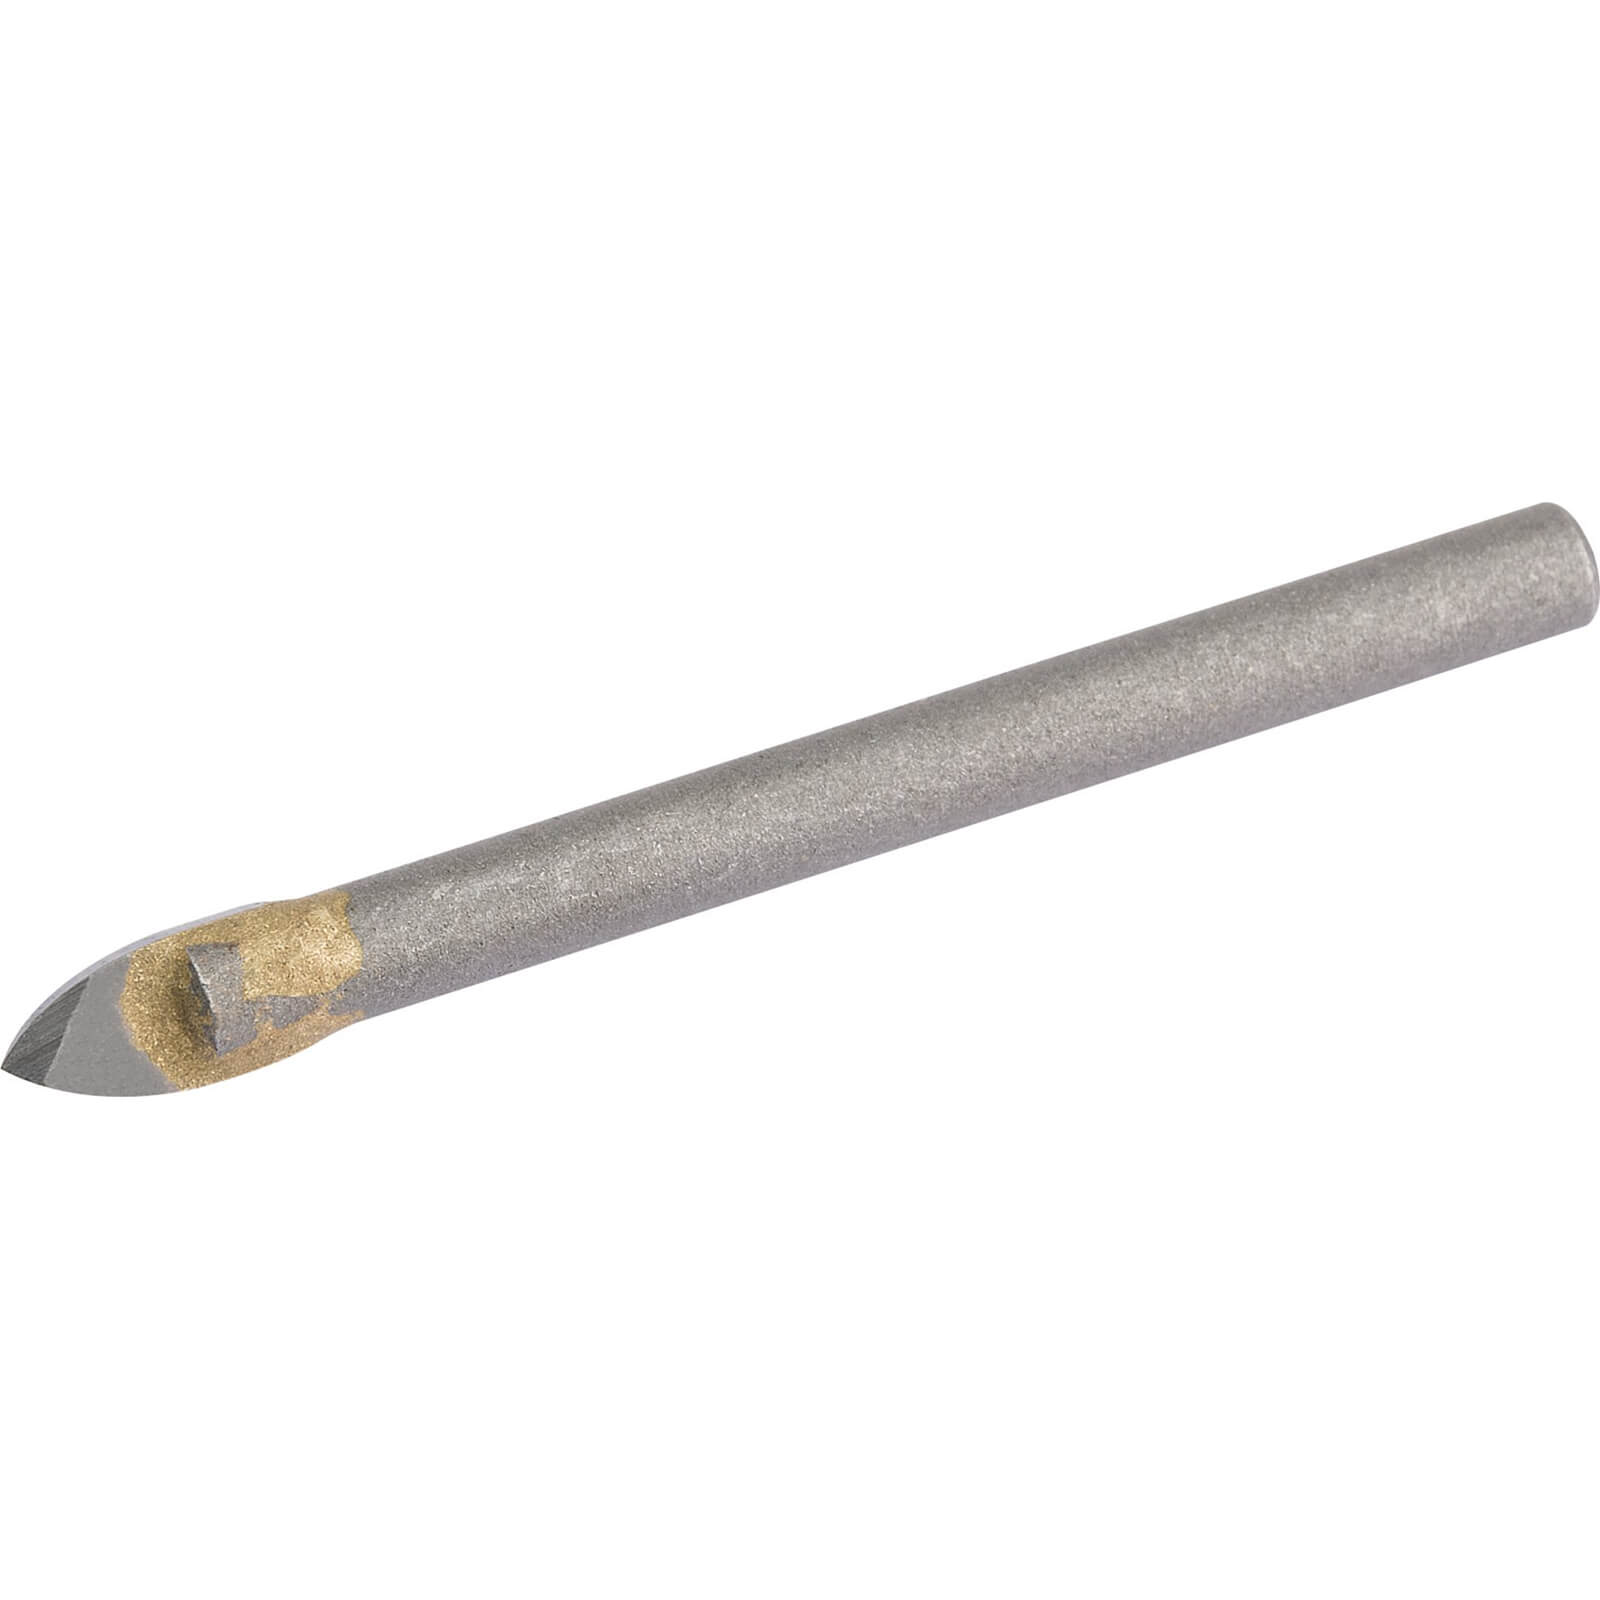 Image of Draper Expert Tile and Glass Drill Bit 5mm